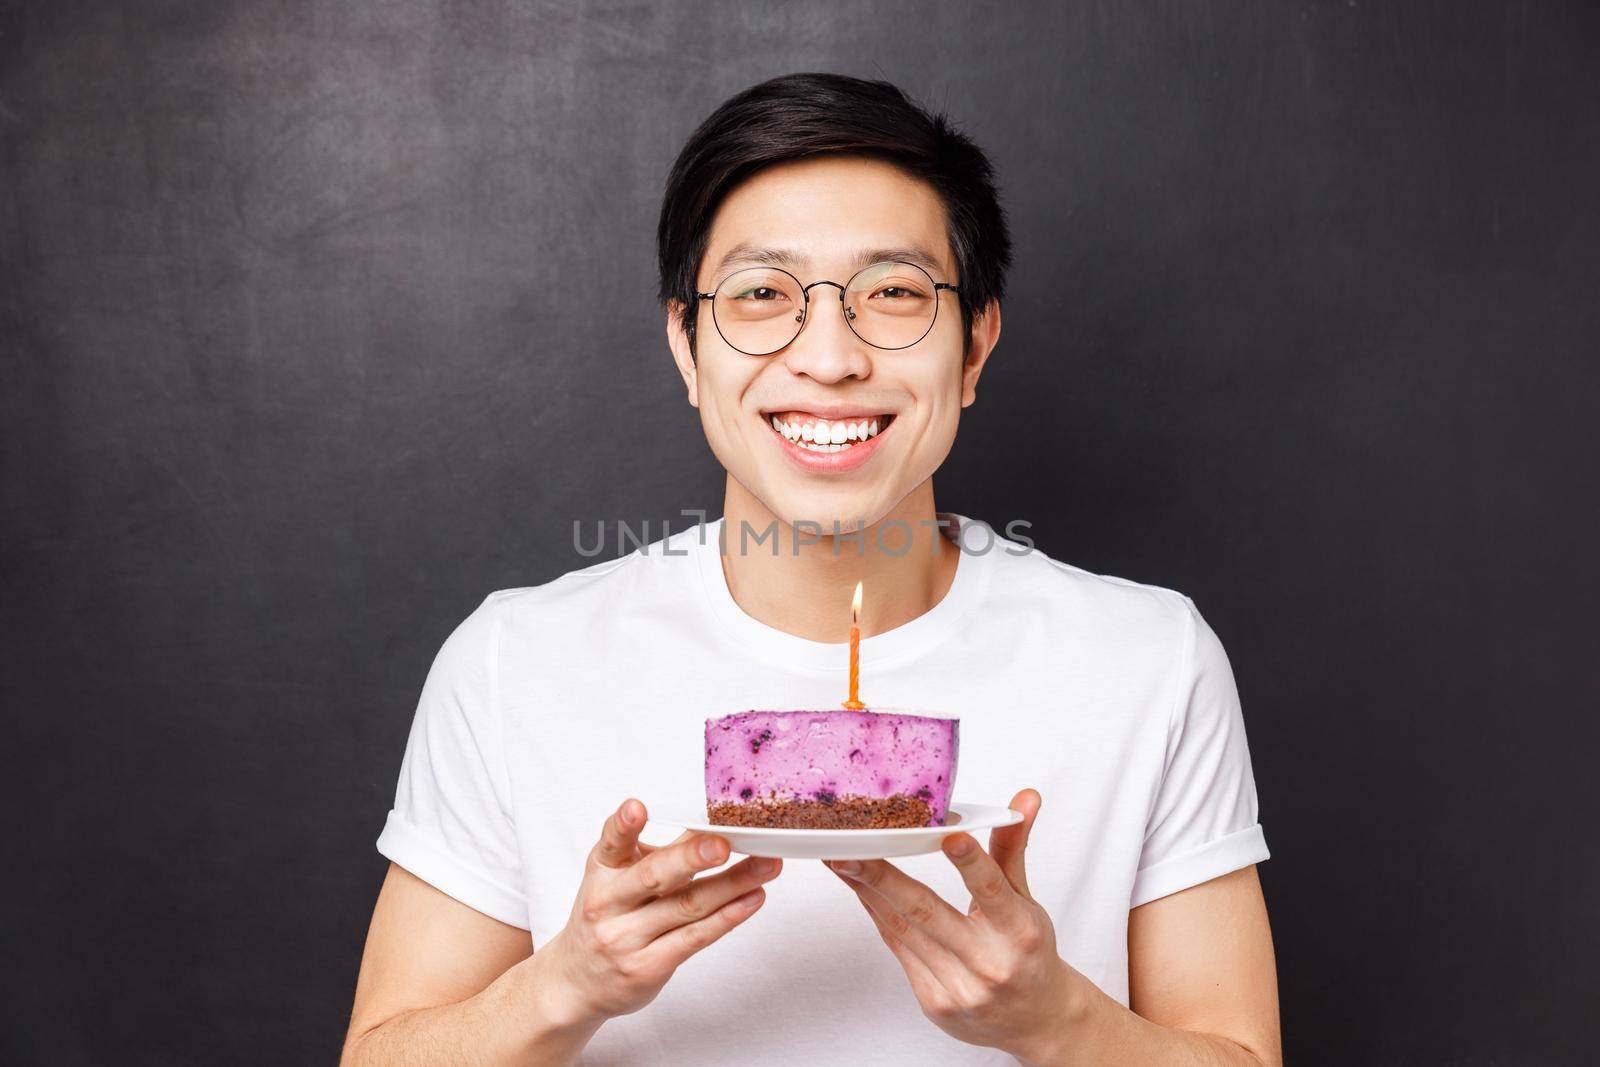 Celebration, holiday and birthday concept. Close-up portrait of happy, cheerful b-day guy holding cake with lit candle, smiling upbeat, thinking what wish make and blow-out, black background.